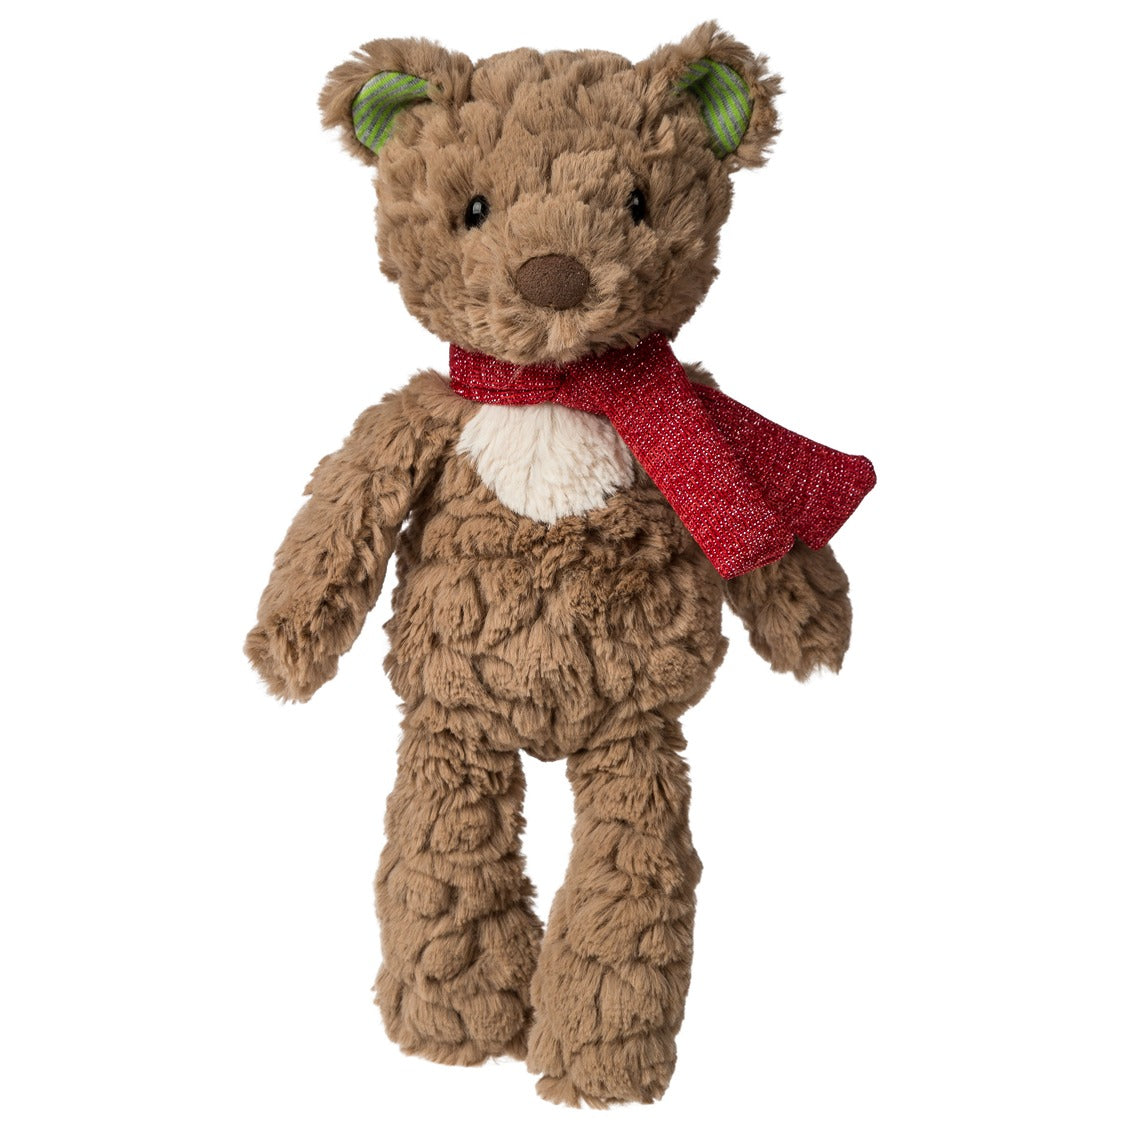 Teddy bear with a sparkly-red scarf